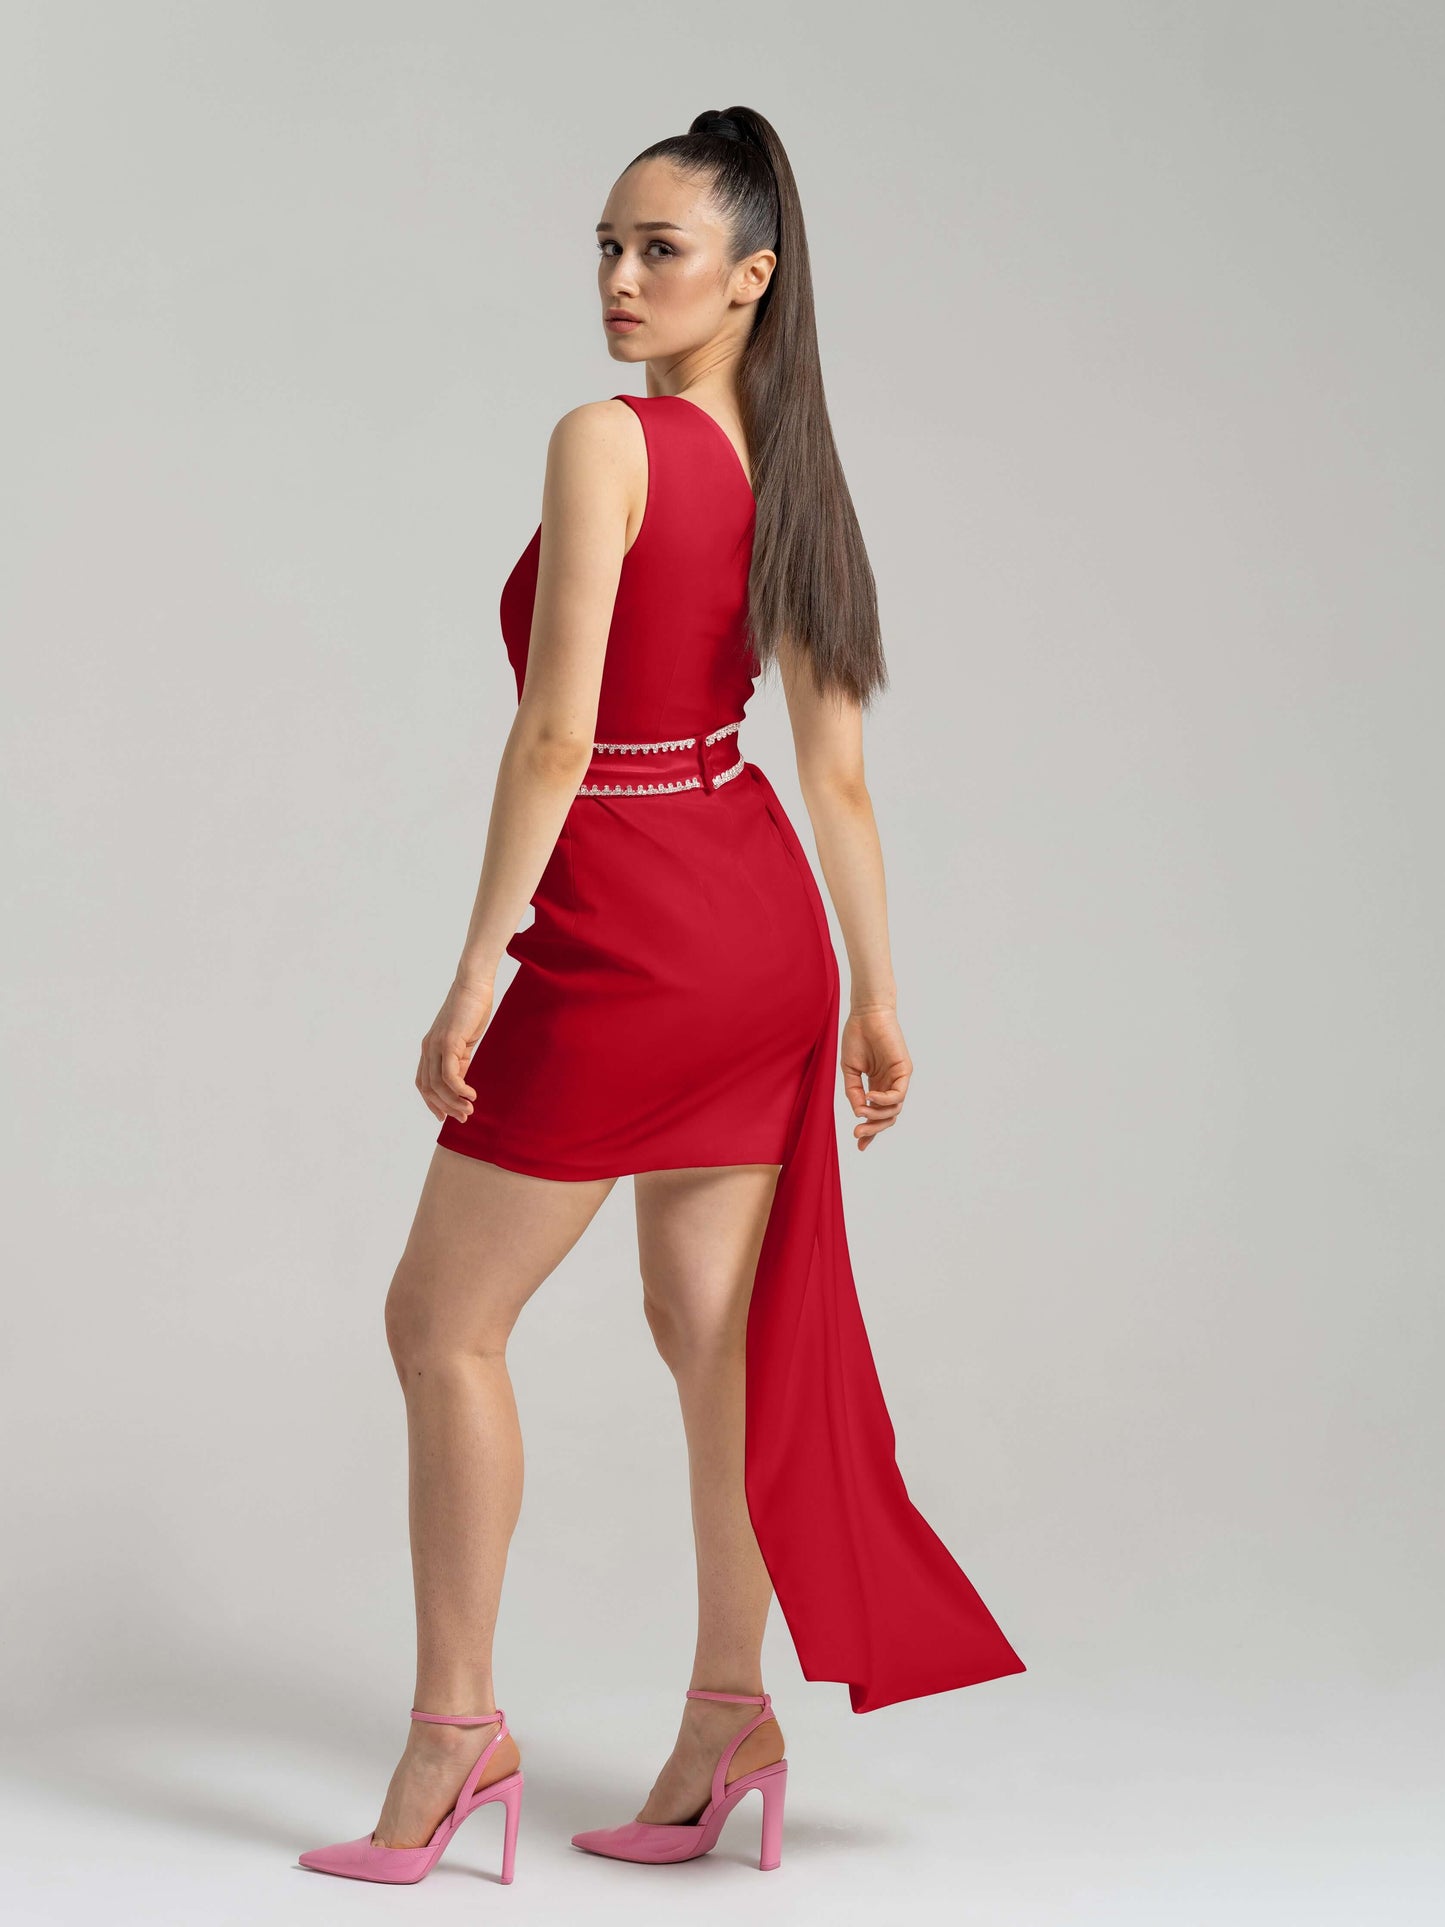 Iconic Glamour Crystal-Adorned Dress - Red